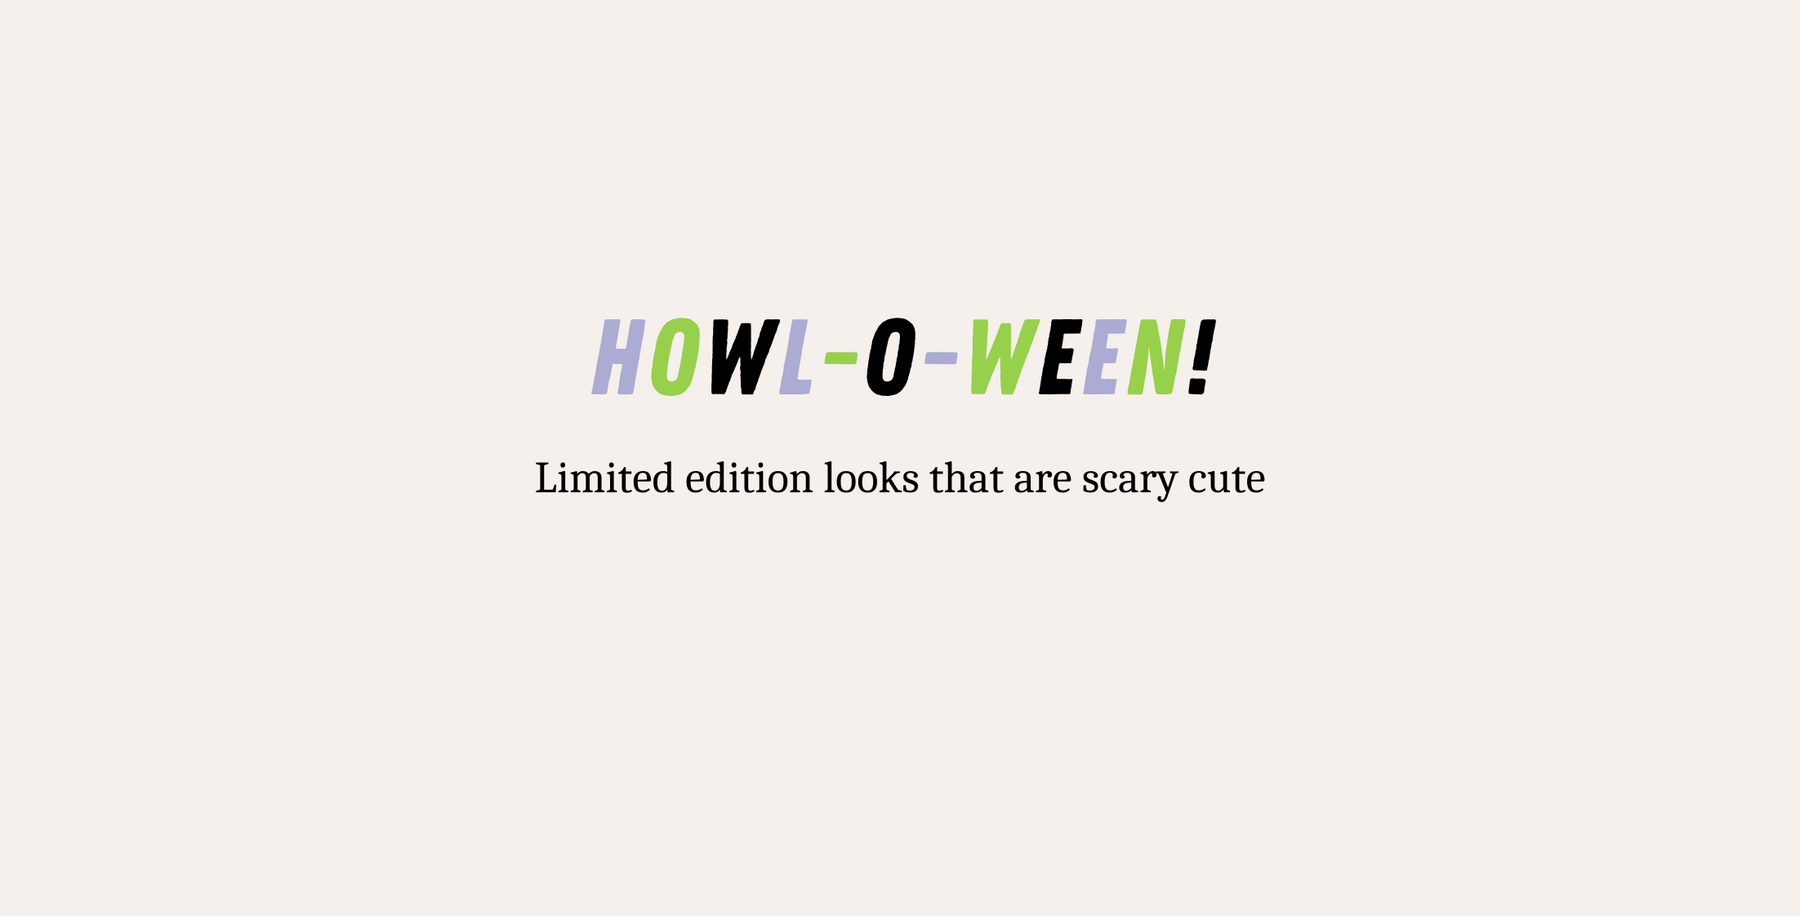 Howl-o-ween. Limited edition looks that are scary cute